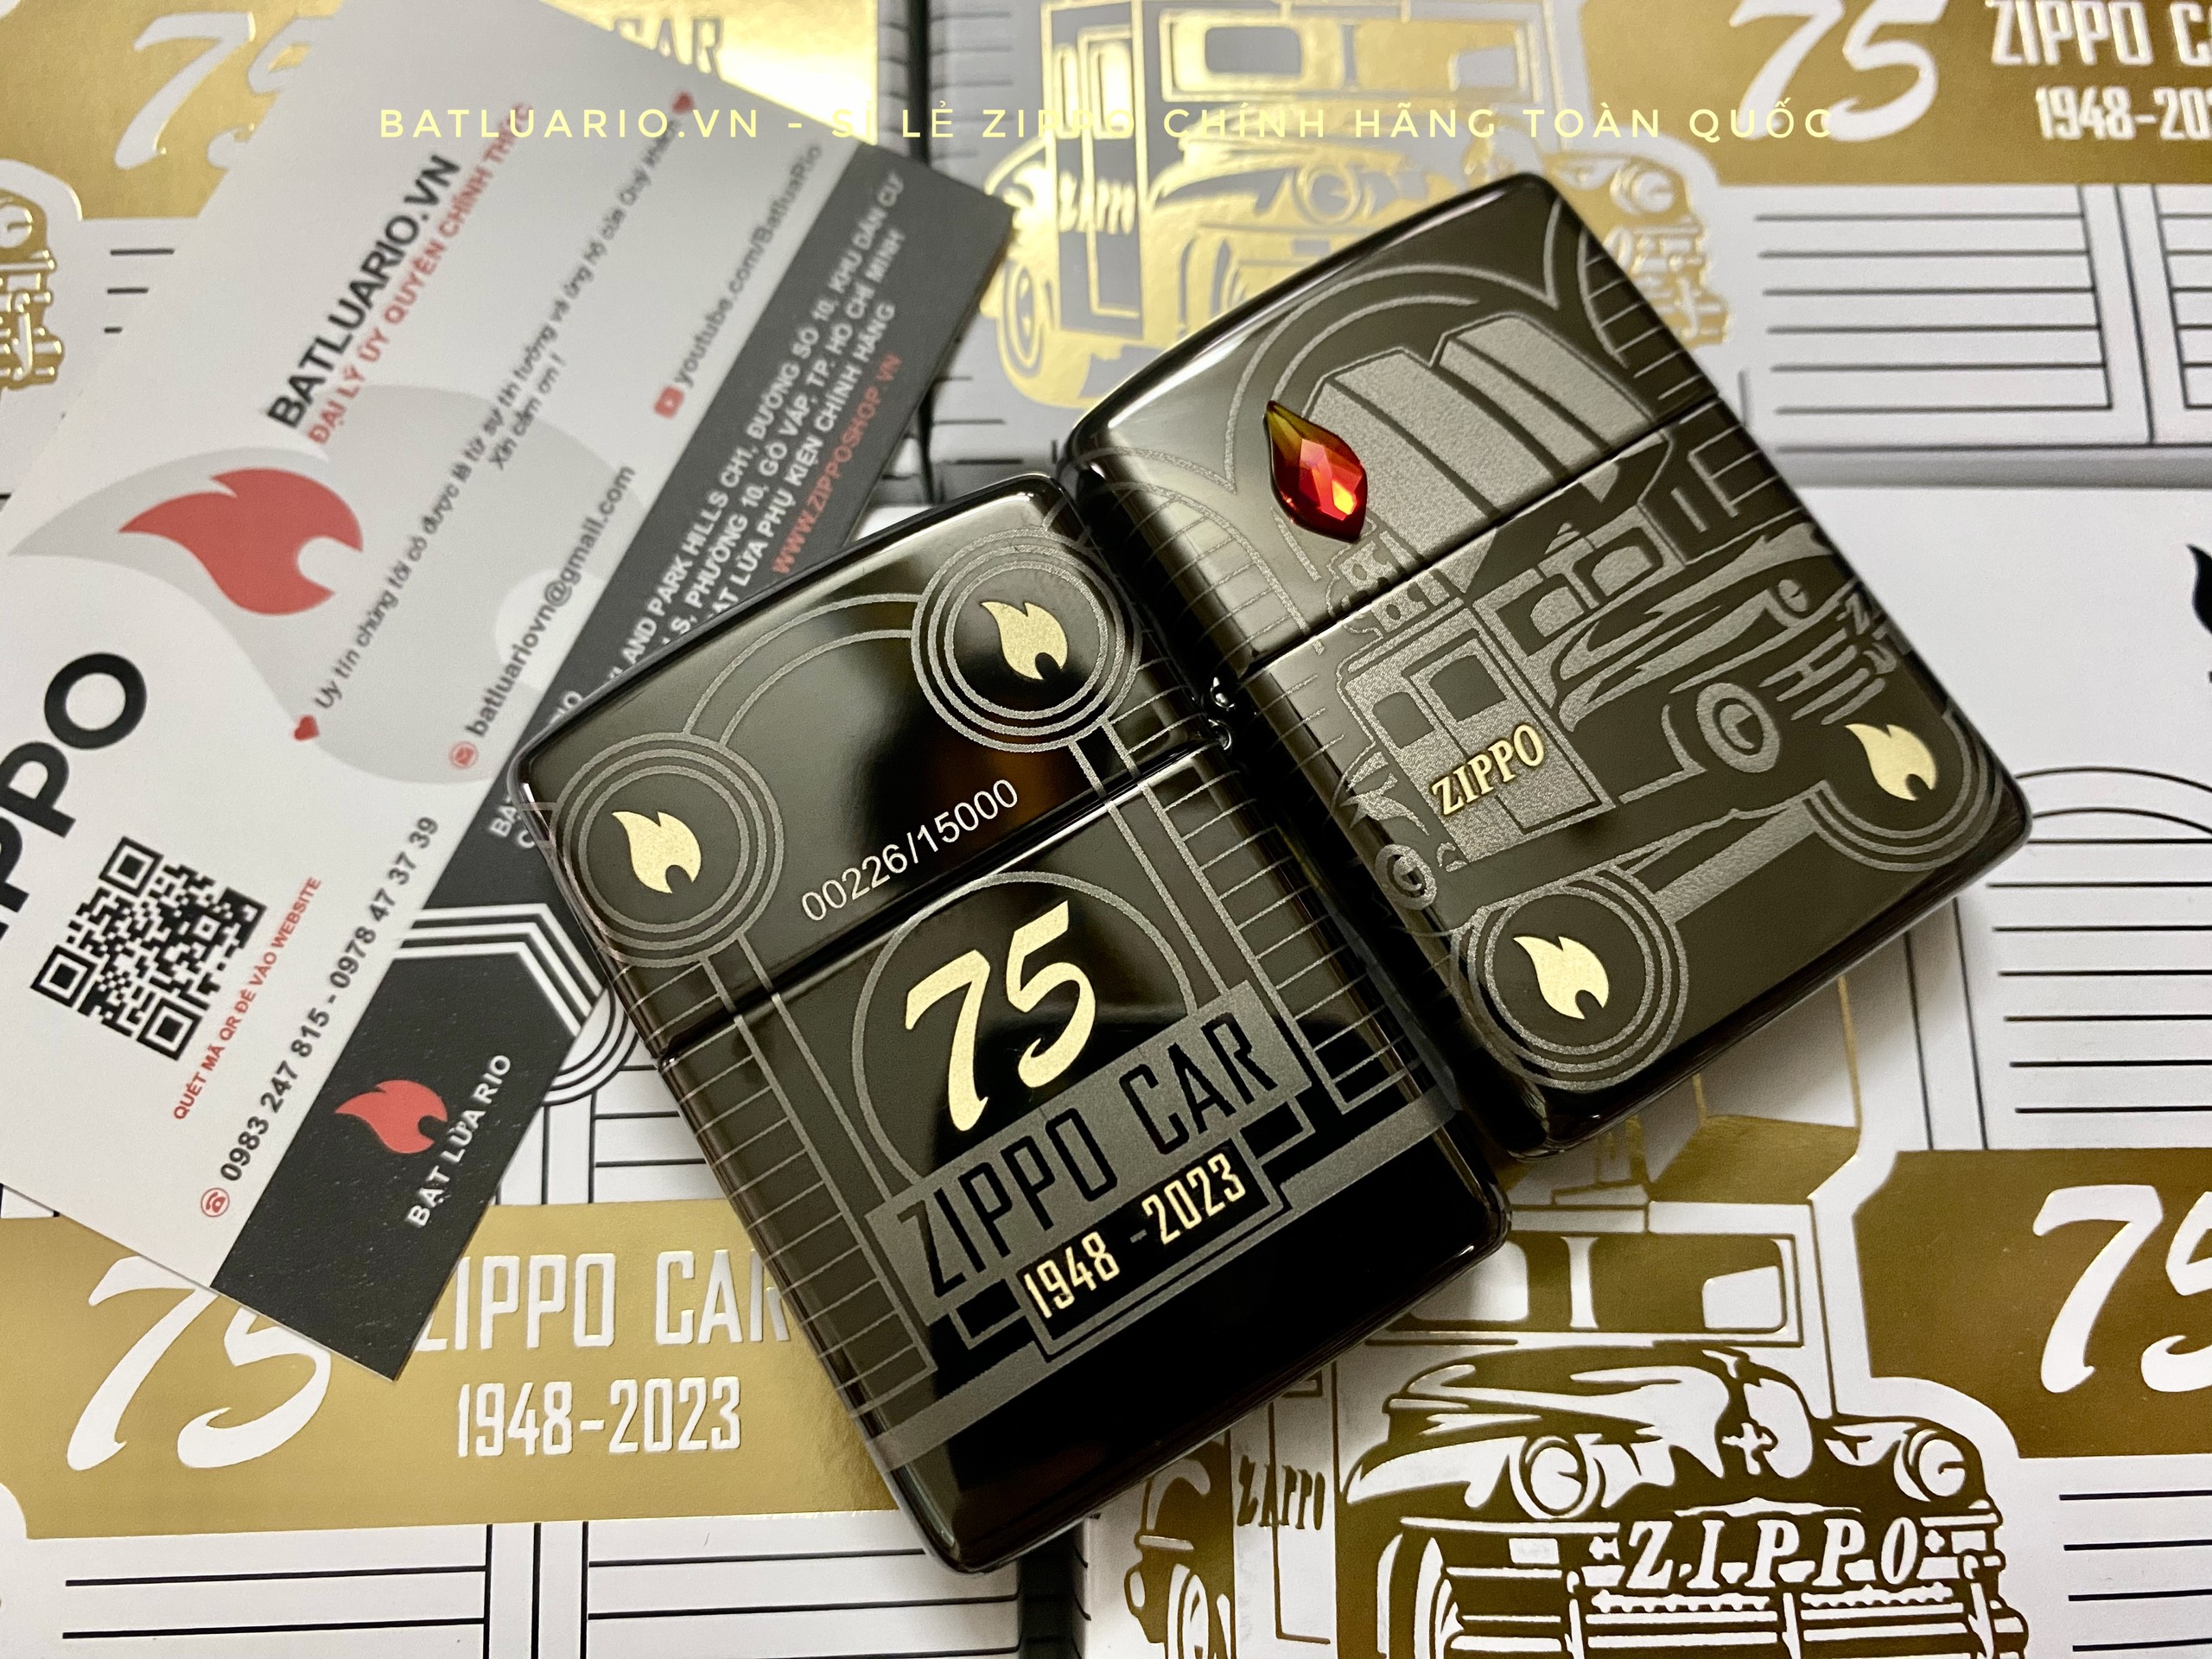 Zippo 48692 - Zippo 2023 Collectible Of The Year - Zippo Car 75th Anniversary Asia Pacific Limited Edition - Zippo COTY 2023 - Honoring 75 Years Of The Zippo Car 110